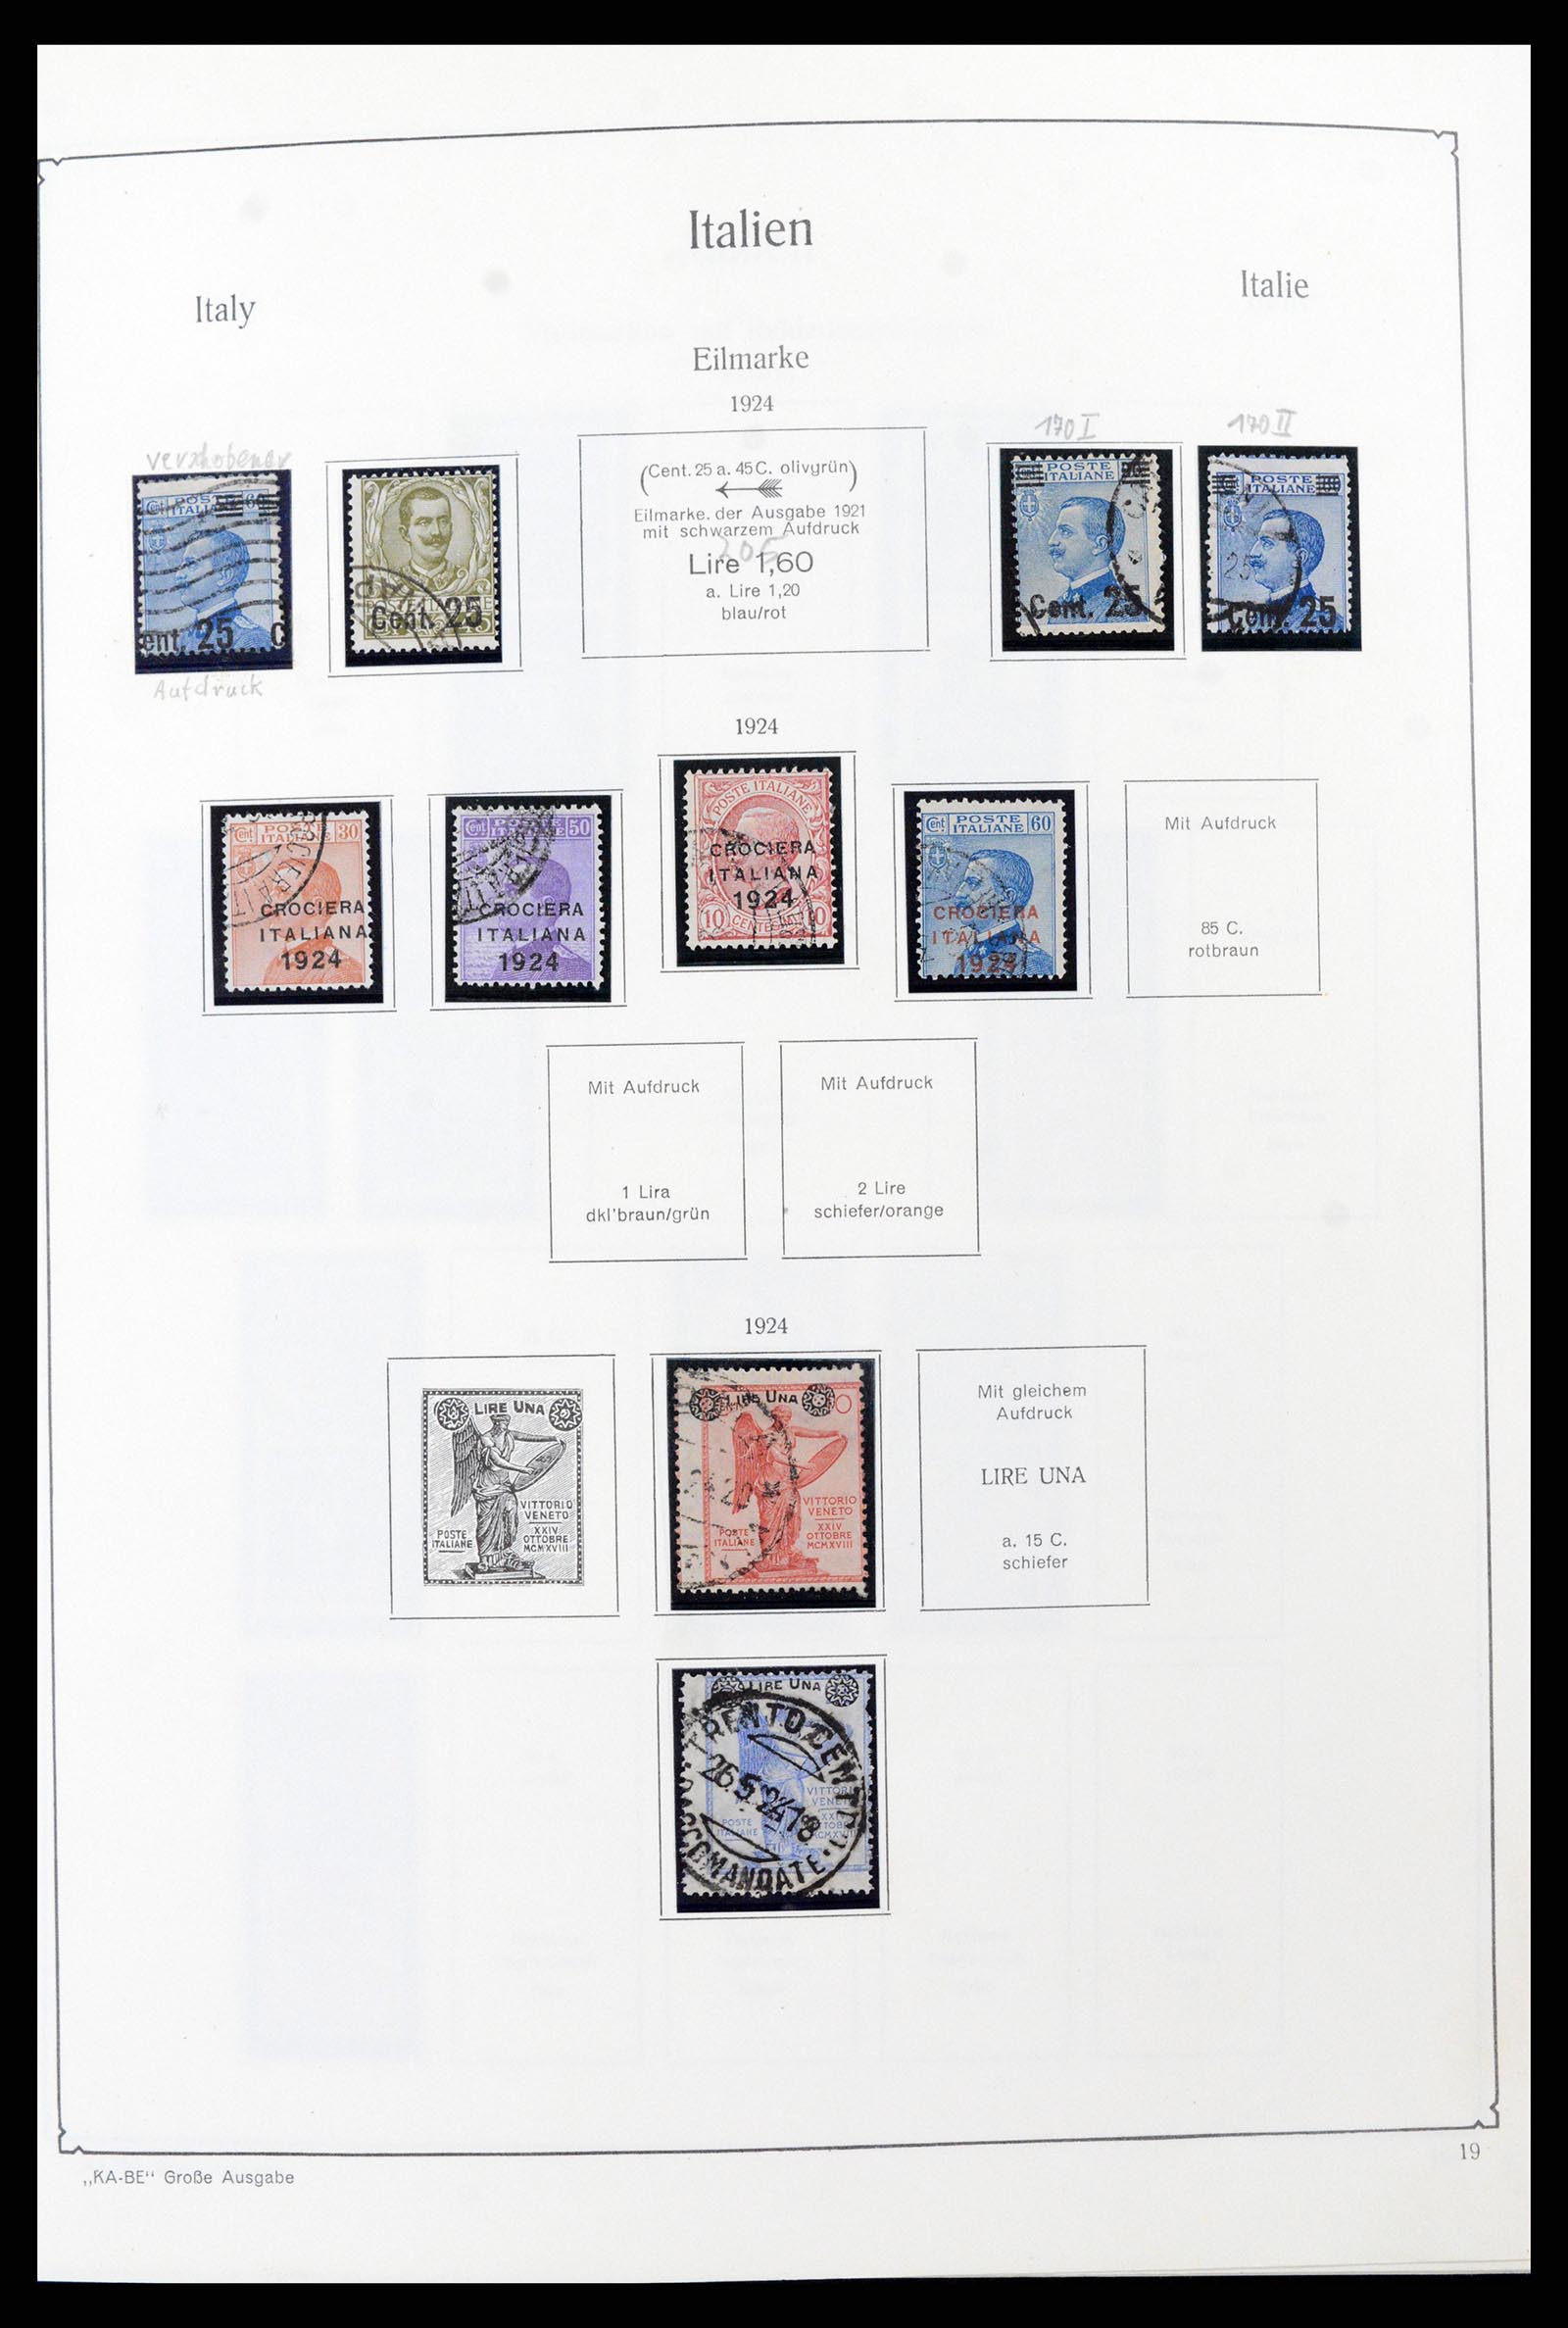 37605 034 - Stamp collection 37605 Italy and States 1855-1974.